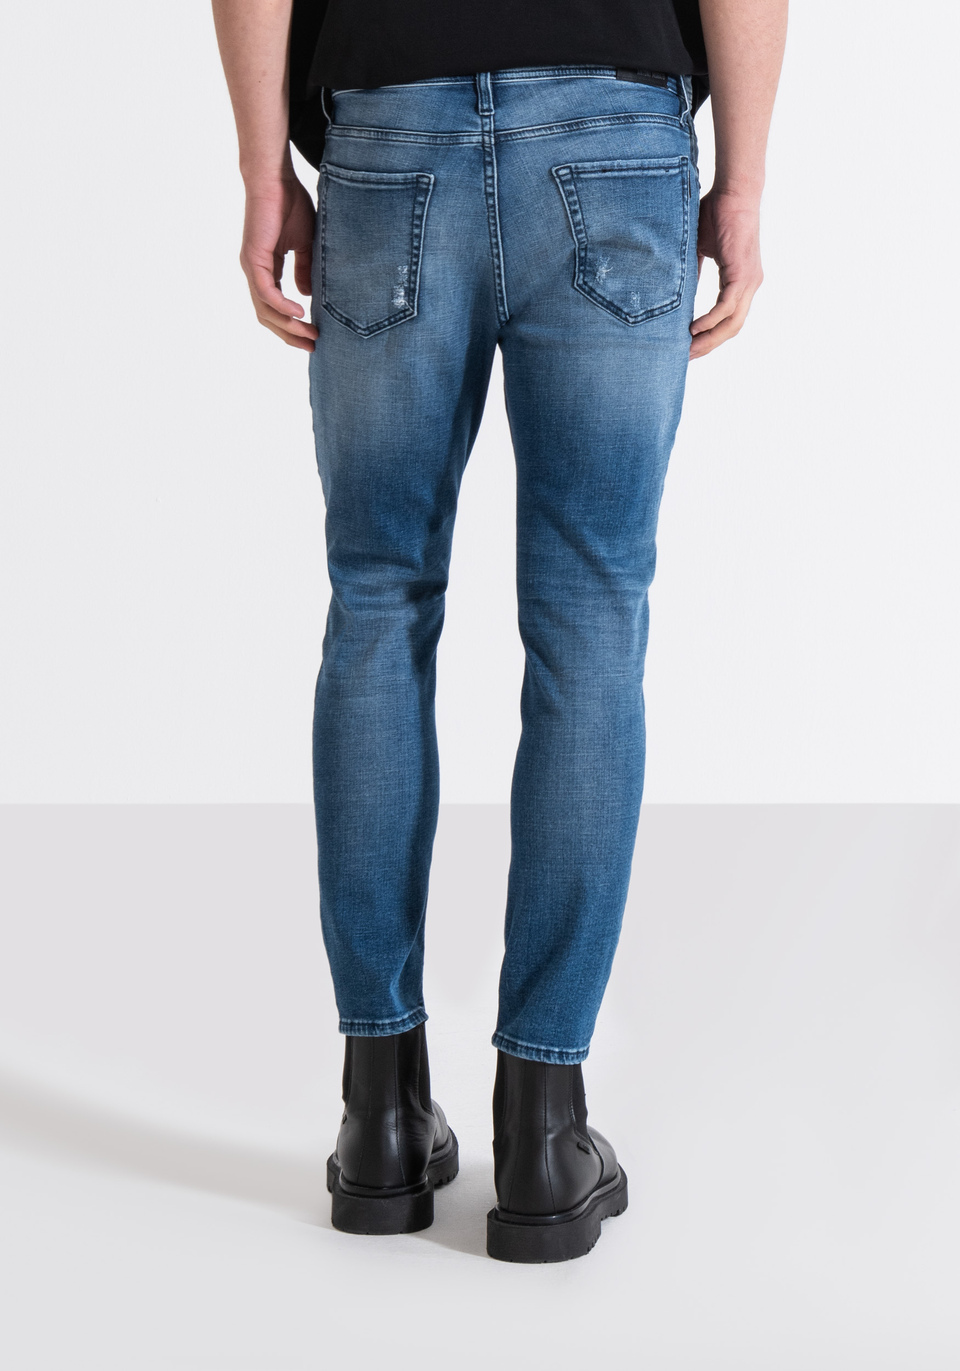 "KARL" CROPPED FIT SKINNY JEANS IN BLUE STRETCH DENIM WITH LIGHT WASH - Antony Morato Online Shop